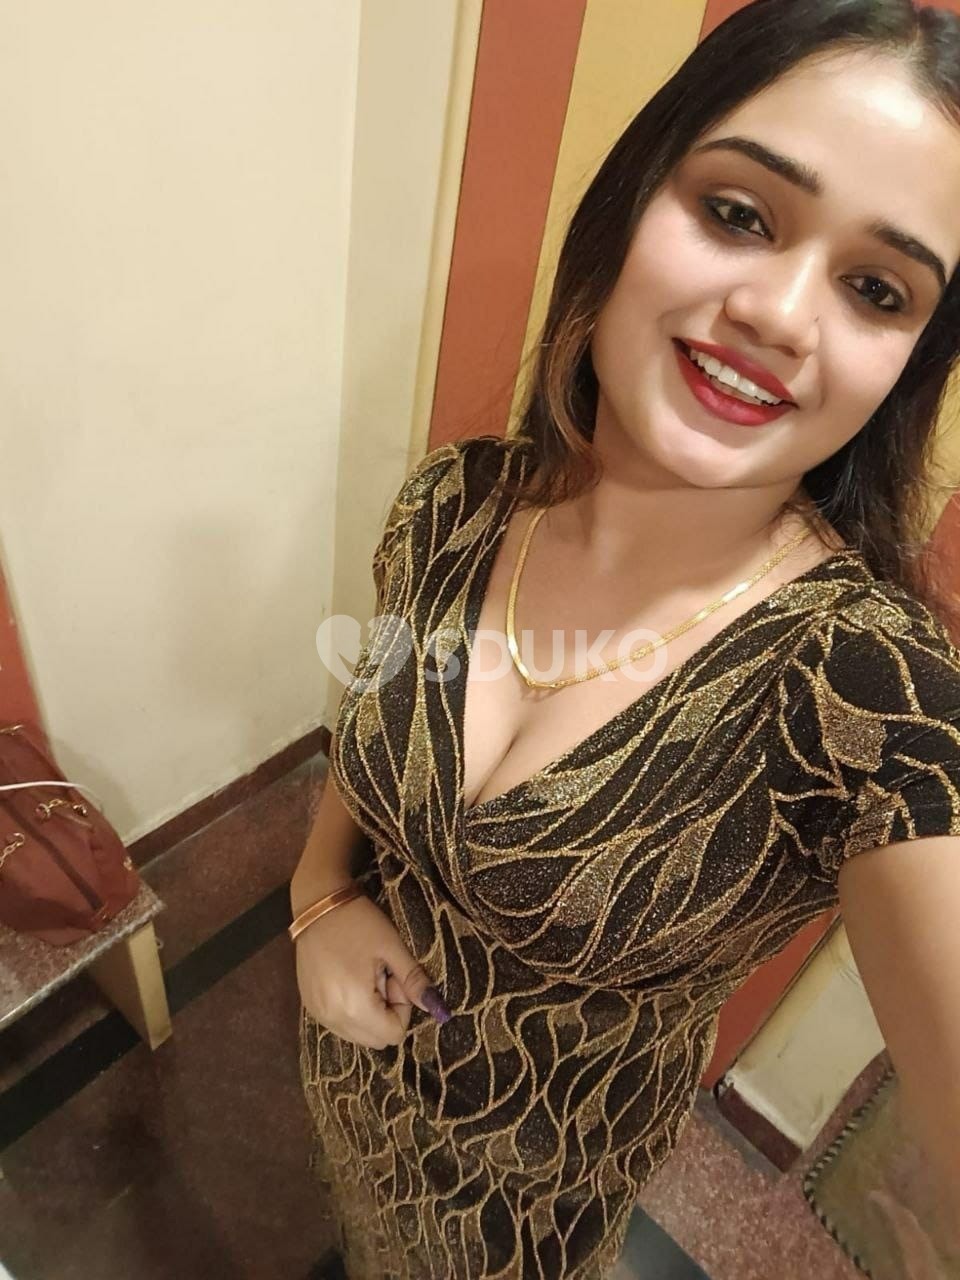 Srinagar ❣️❣️Low price high profile college girl and aunty available any time available service genuine vip call